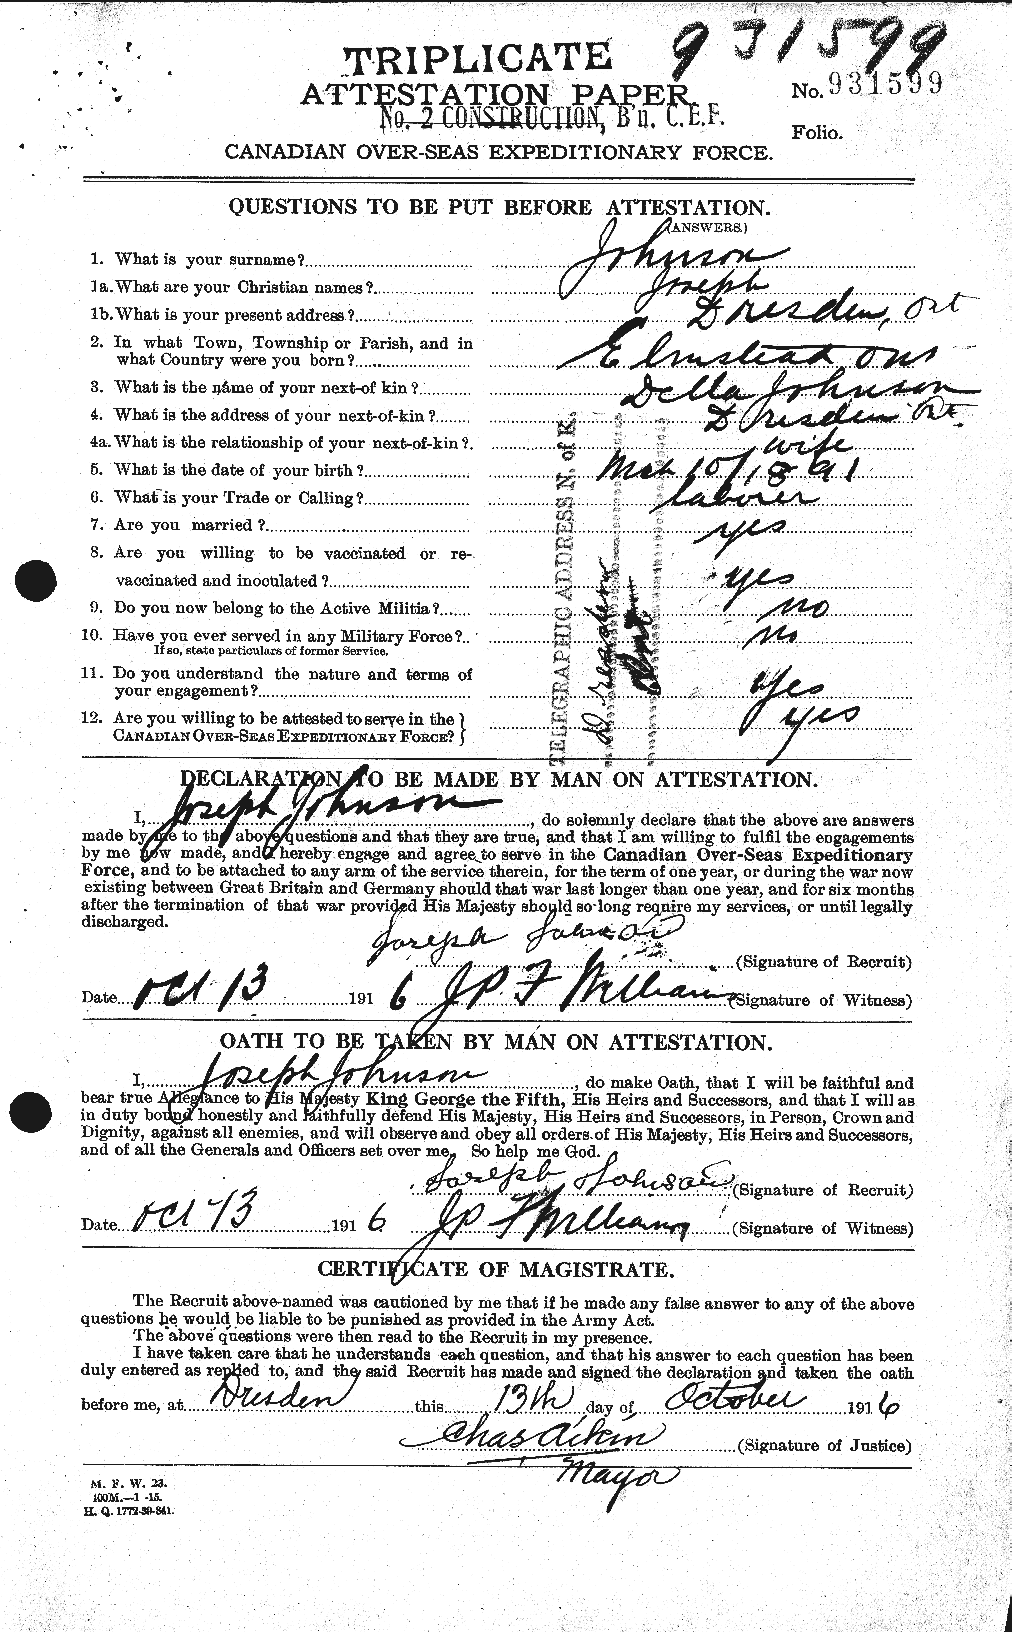 Personnel Records of the First World War - CEF 422005a